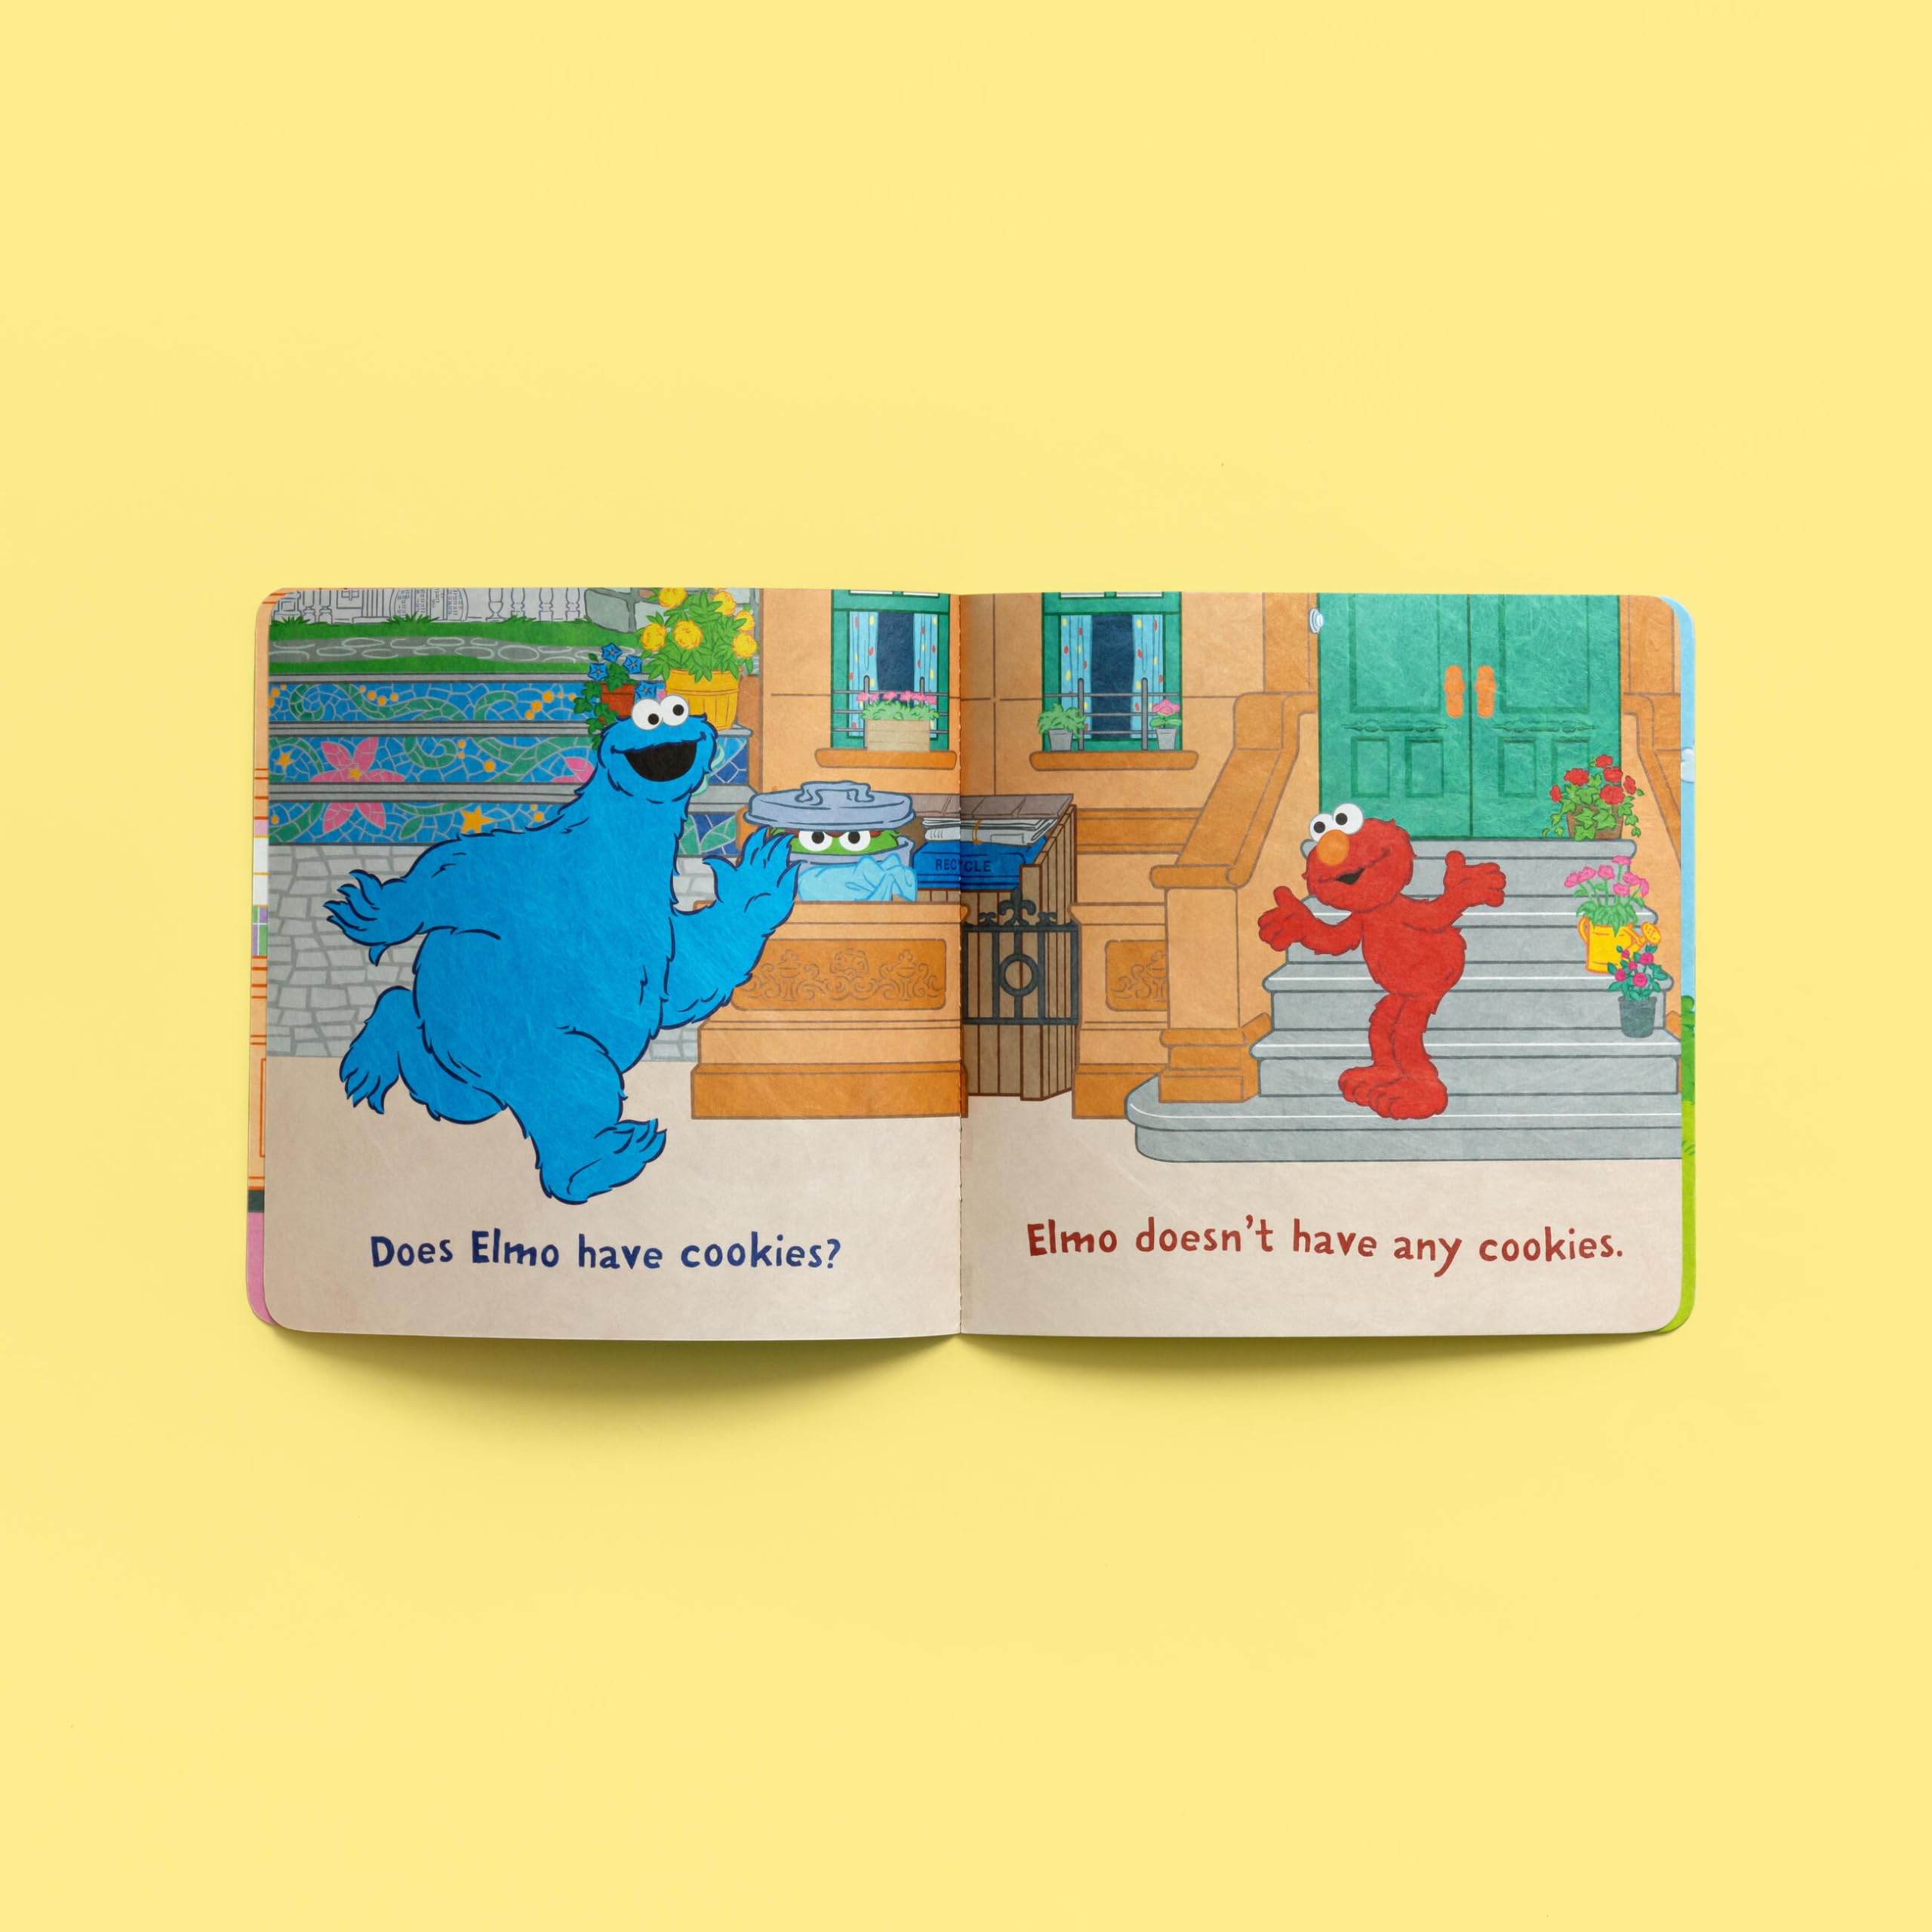 Indestructibles: Sesame Street: Cookie Monster Finds a Snack: Chew Proof · Rip Proof · Nontoxic · 100% Washable (Book for Babies, Newborn Books, Safe to Chew)